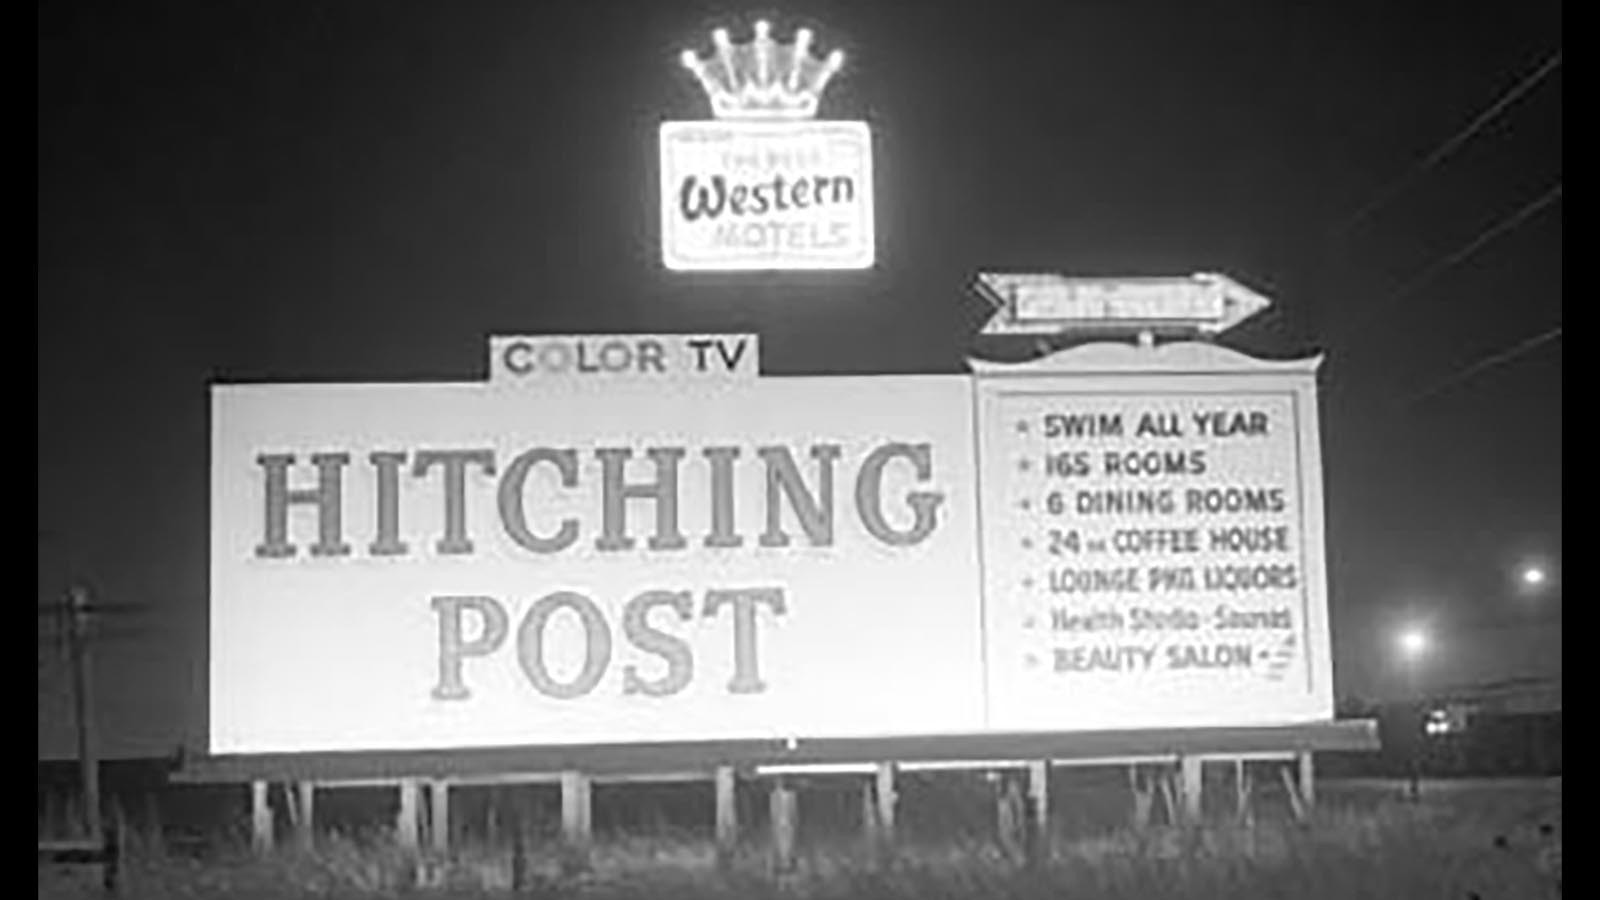 A billboard pointing travelers to Cheyenne's Hitching Post Inn.